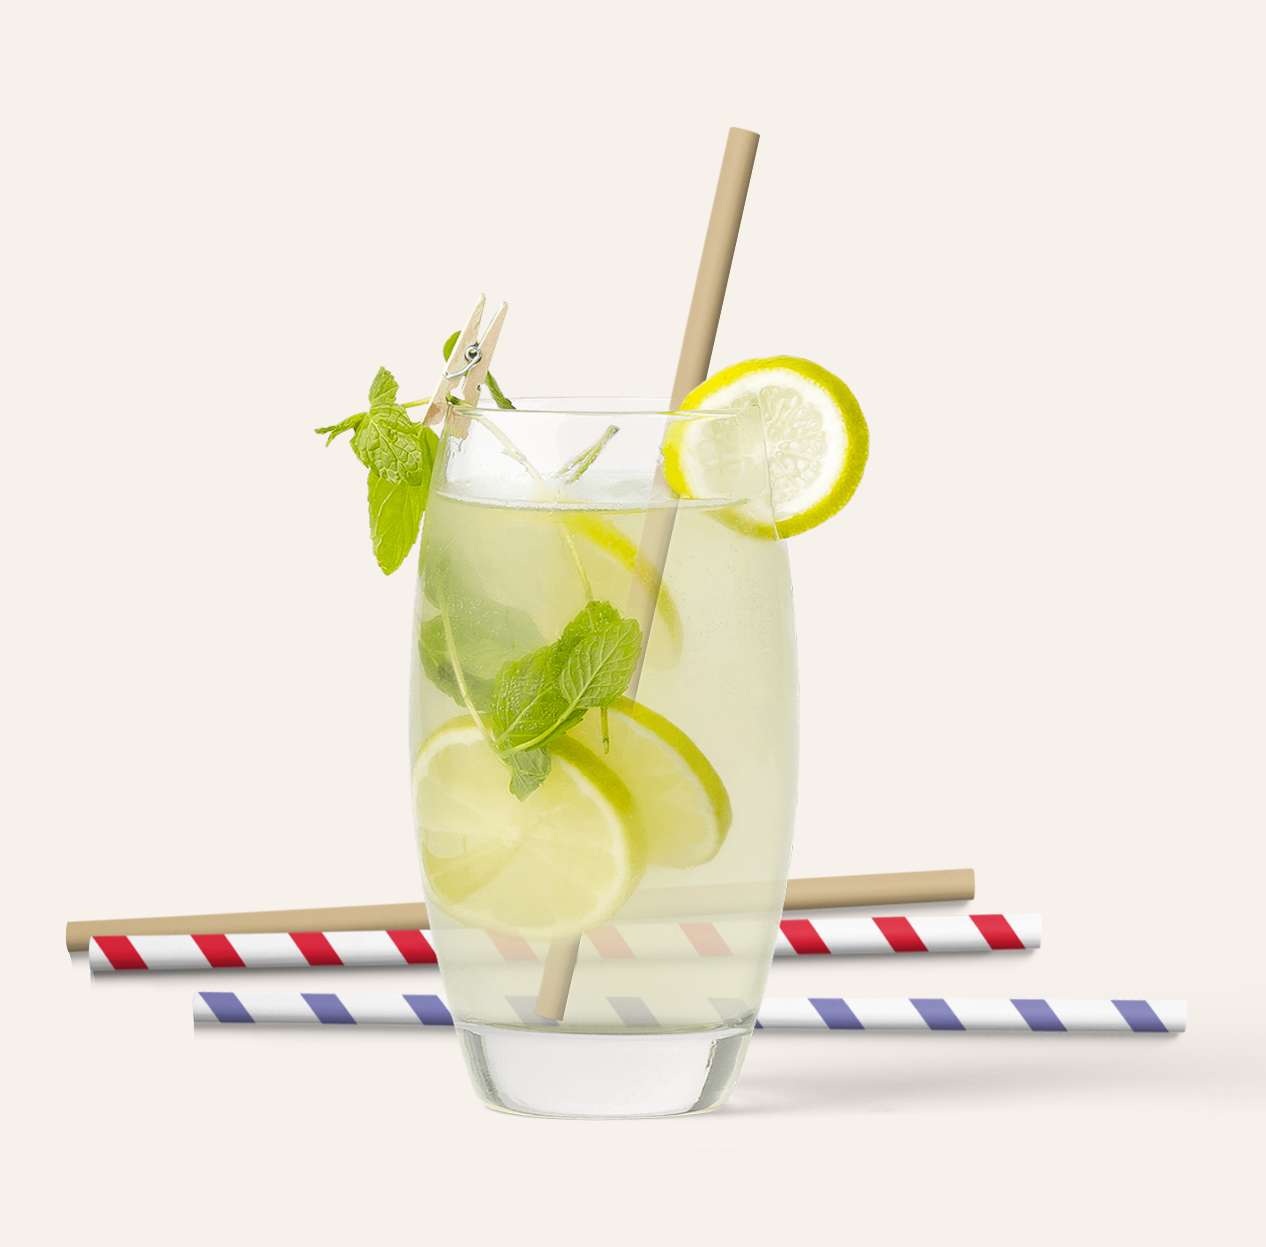 Food-Grade Glue for Paper Straws That Sticks with You